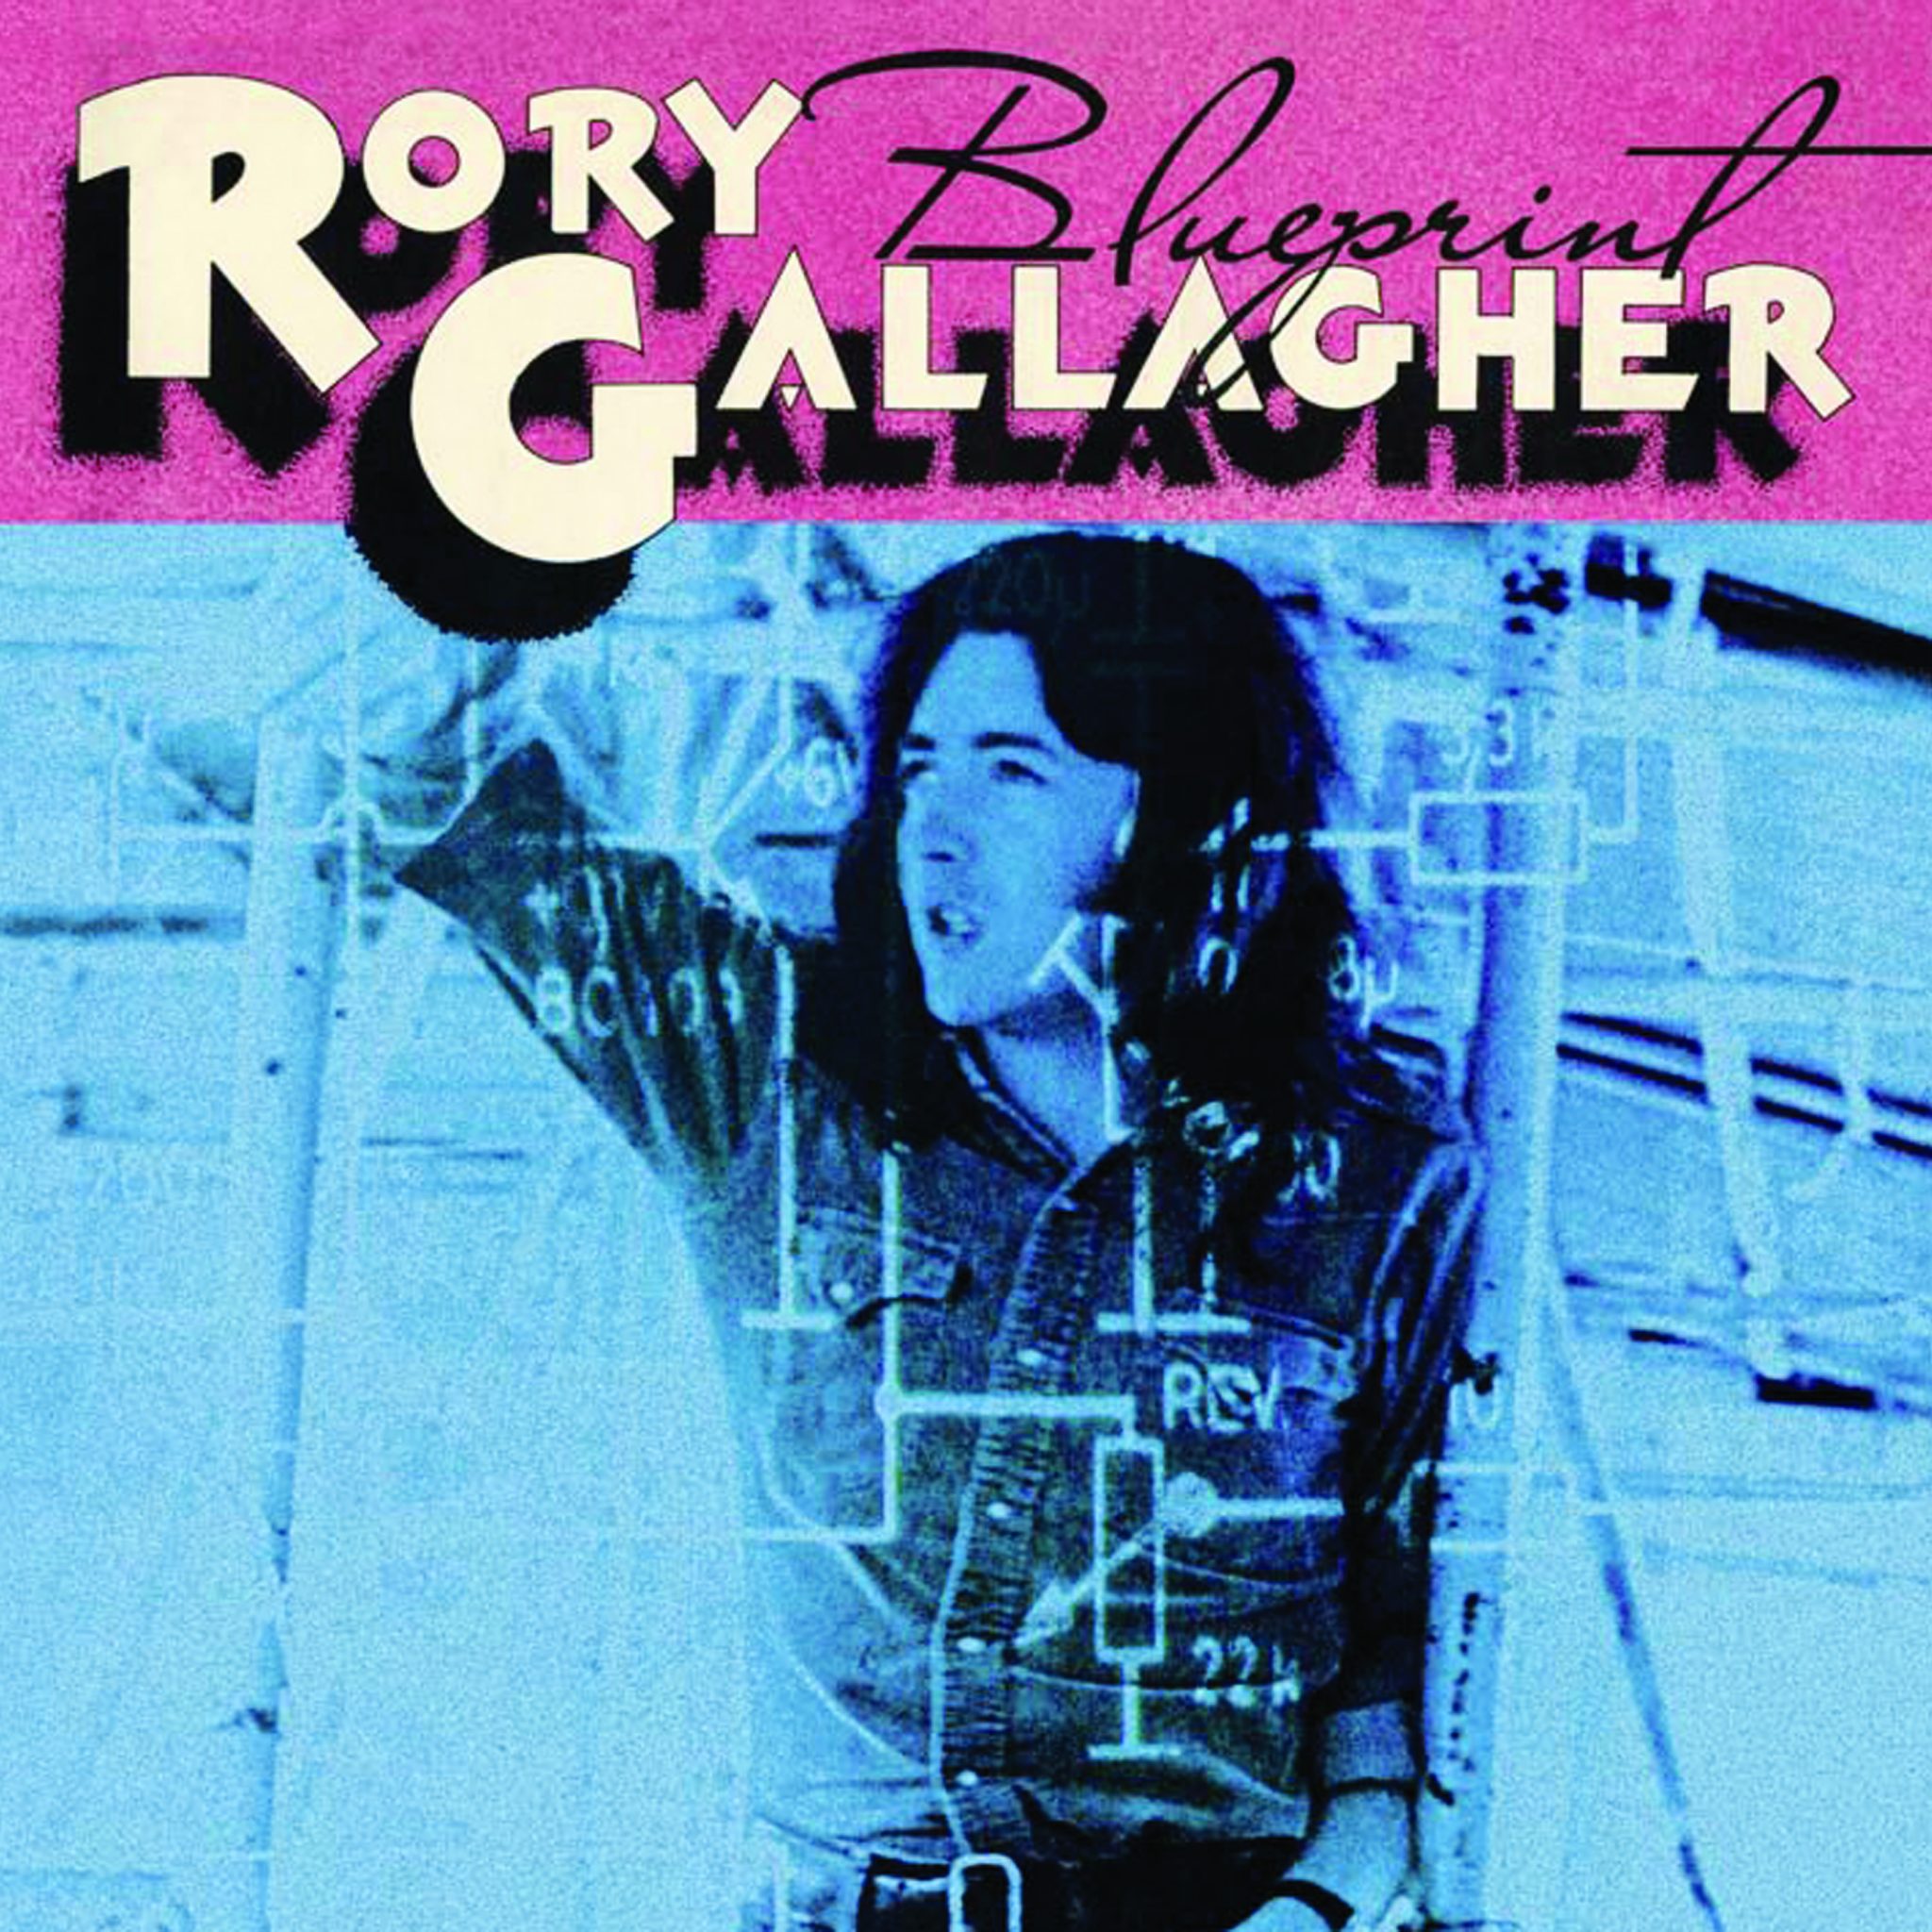 Rory Gallagher solo catalogue reissued tomorrow!